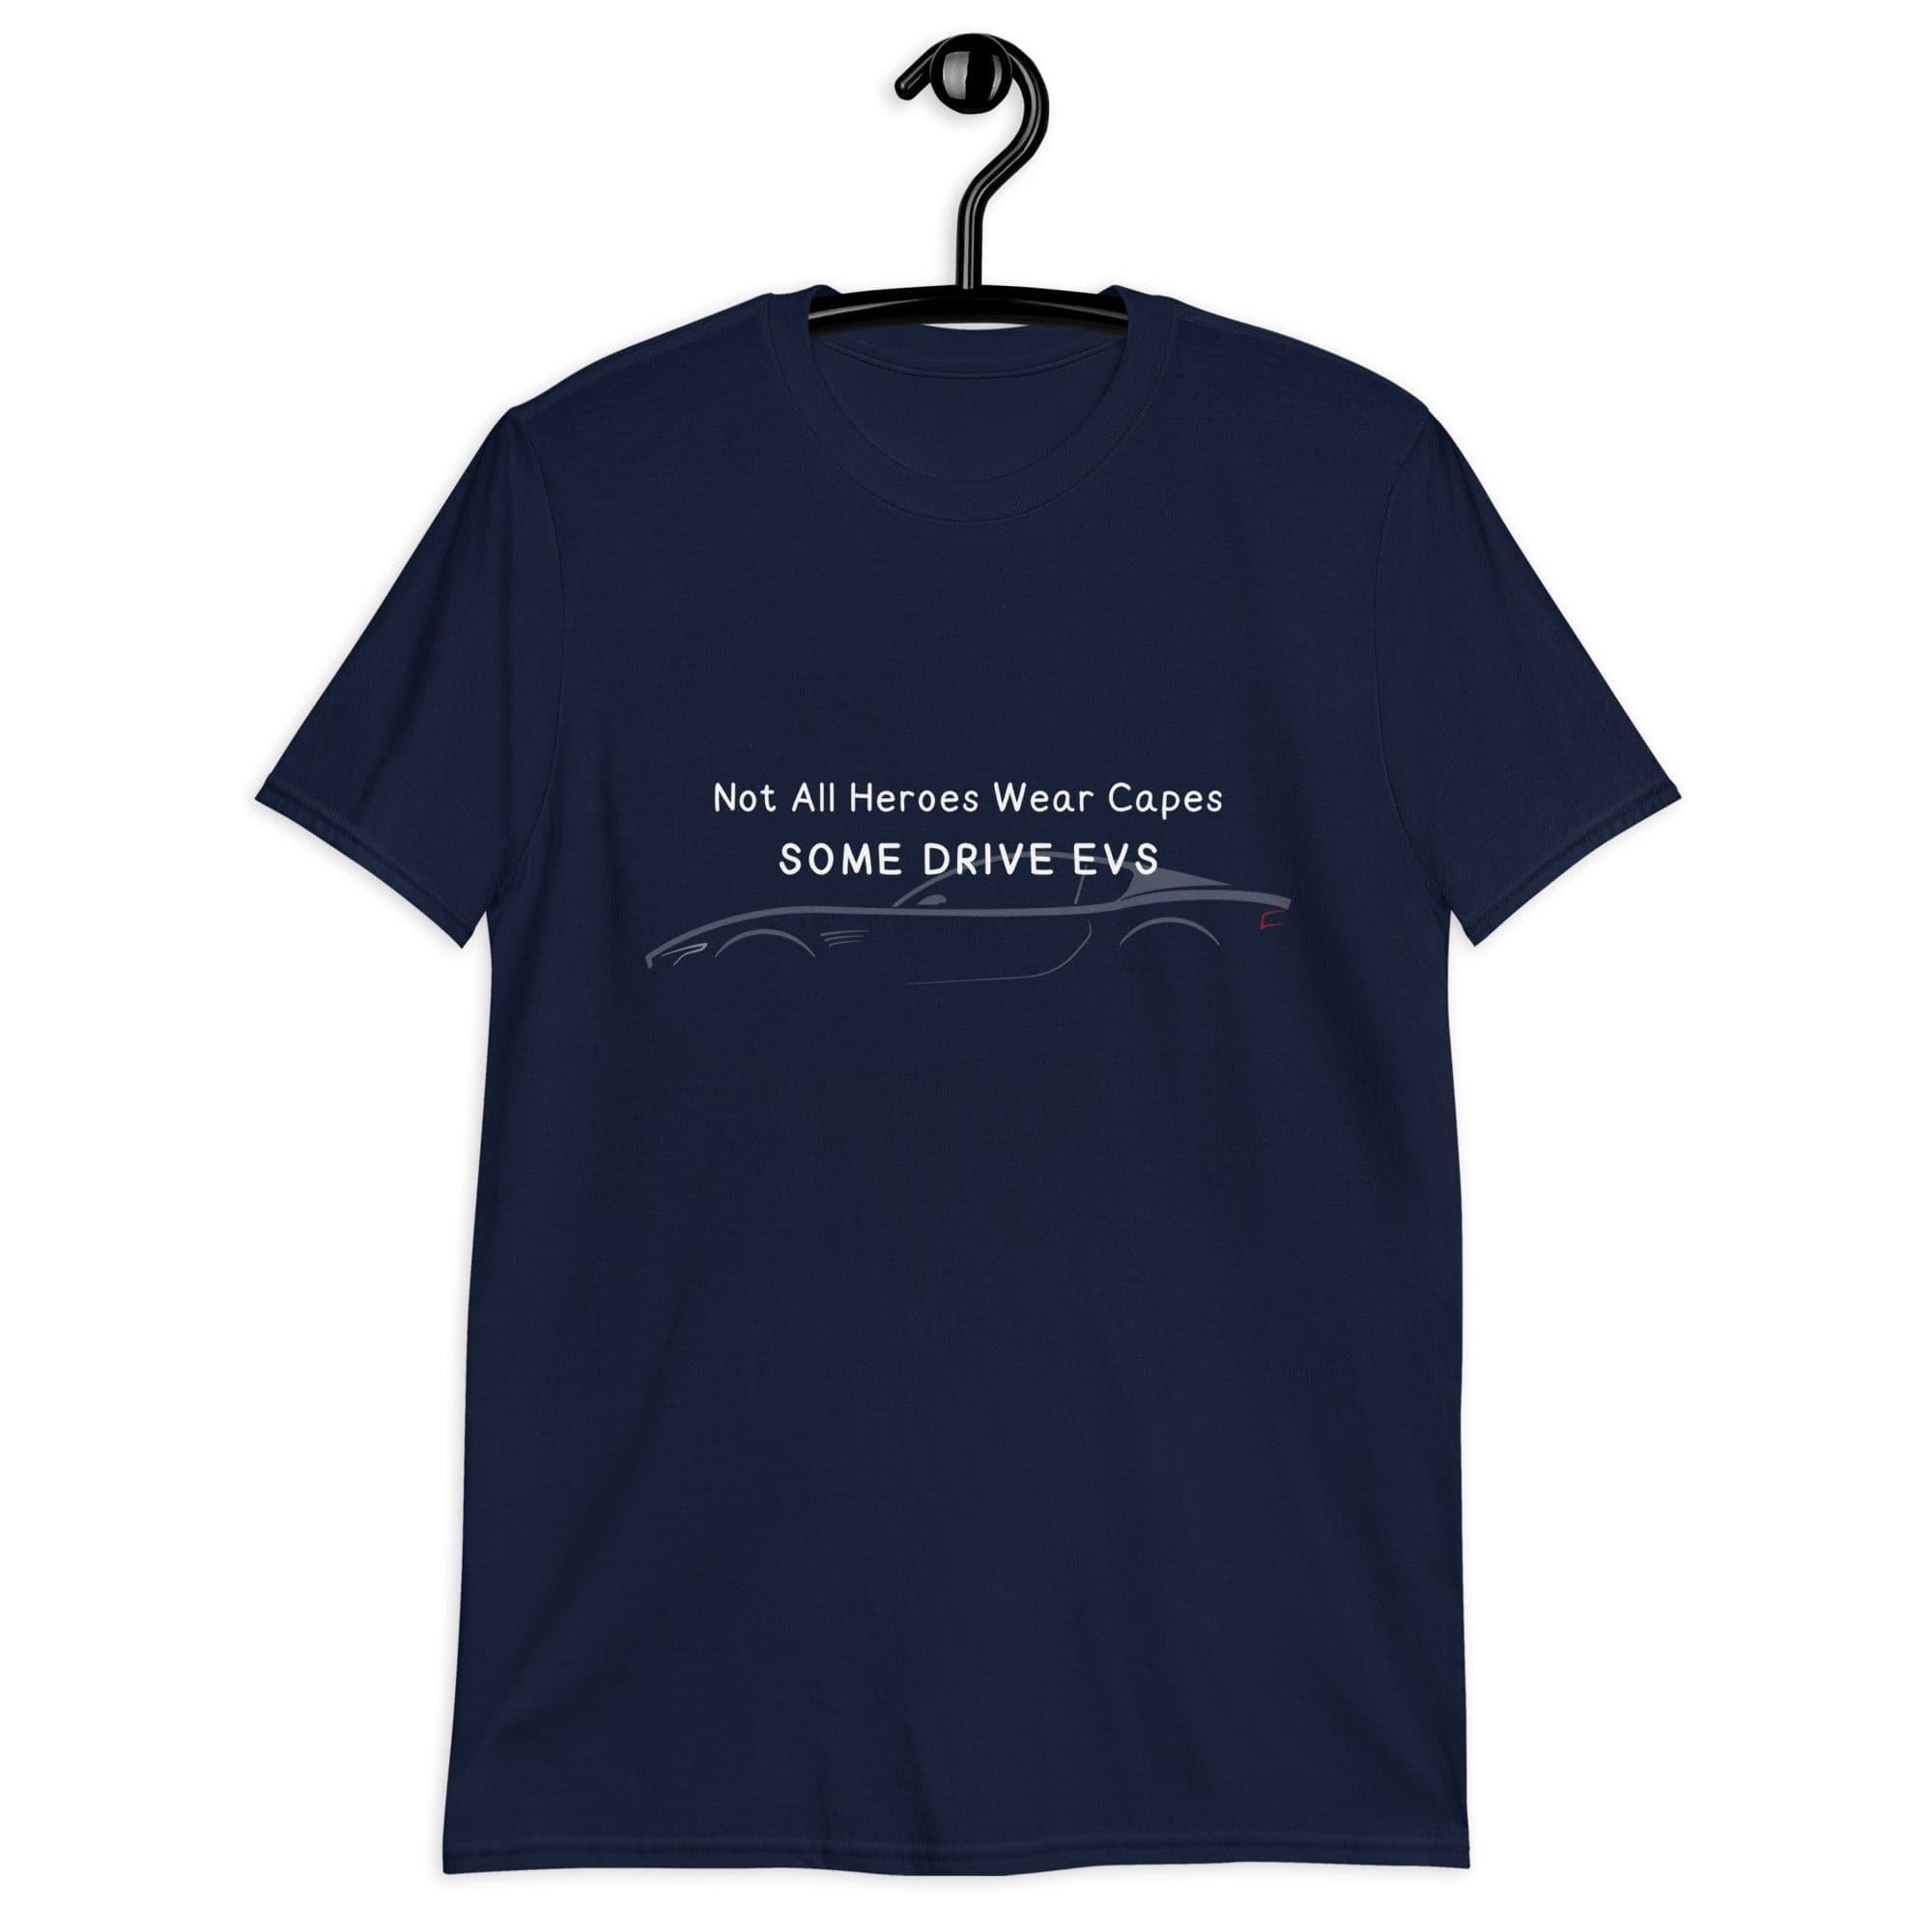 "Not All Heroes Wear Capes, Some Drive EVs" Short-Sleeve Unisex T-Shirt - EV Universe Shop